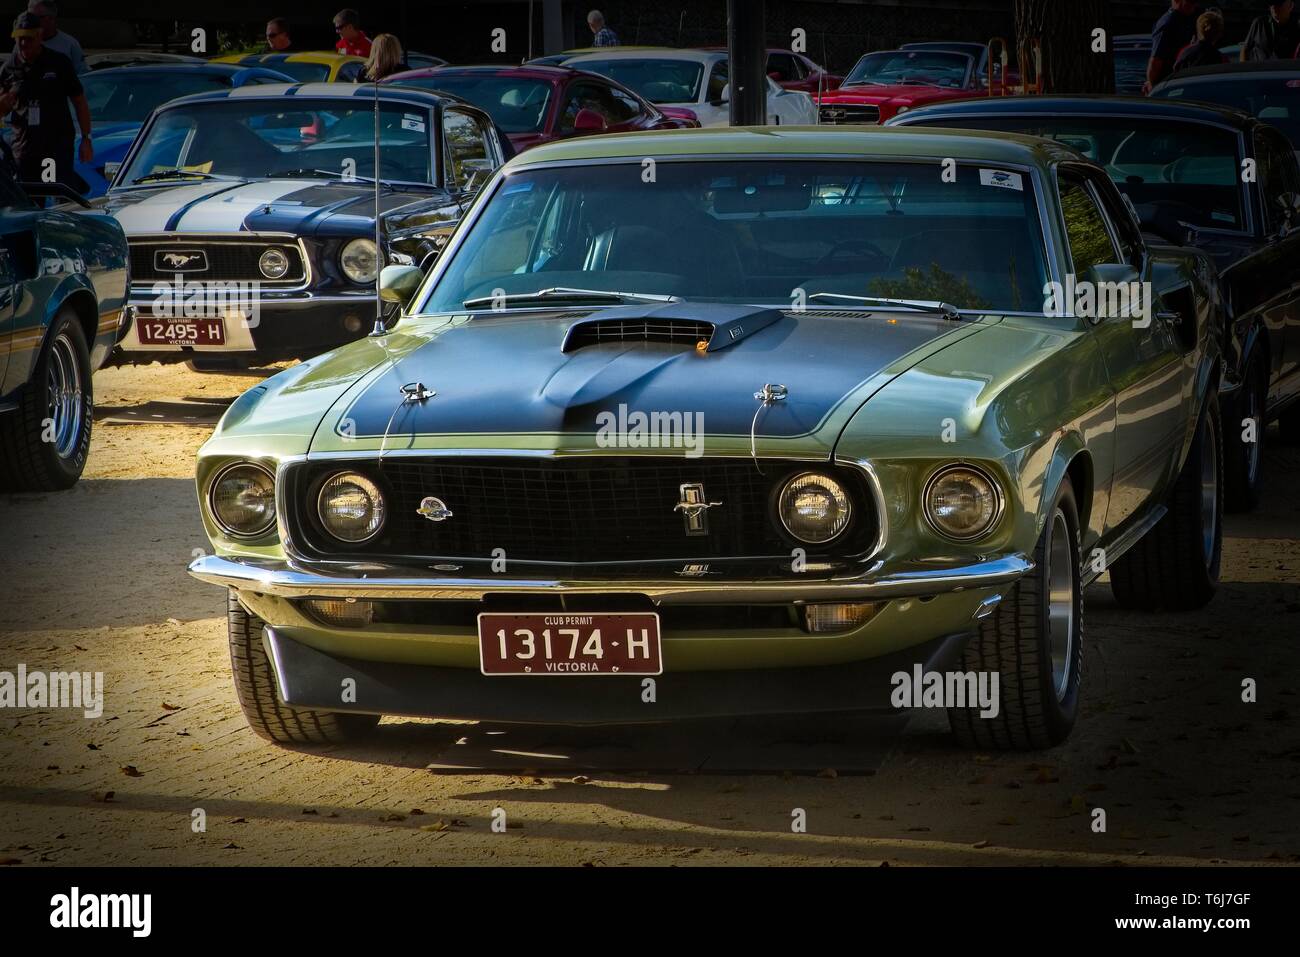 Green 1969 Mach 1 on show at 2019 Mustang Nationals Melbourne, with blue 1968 Fastback and others in the background on Birrarung Marr Stock Photo